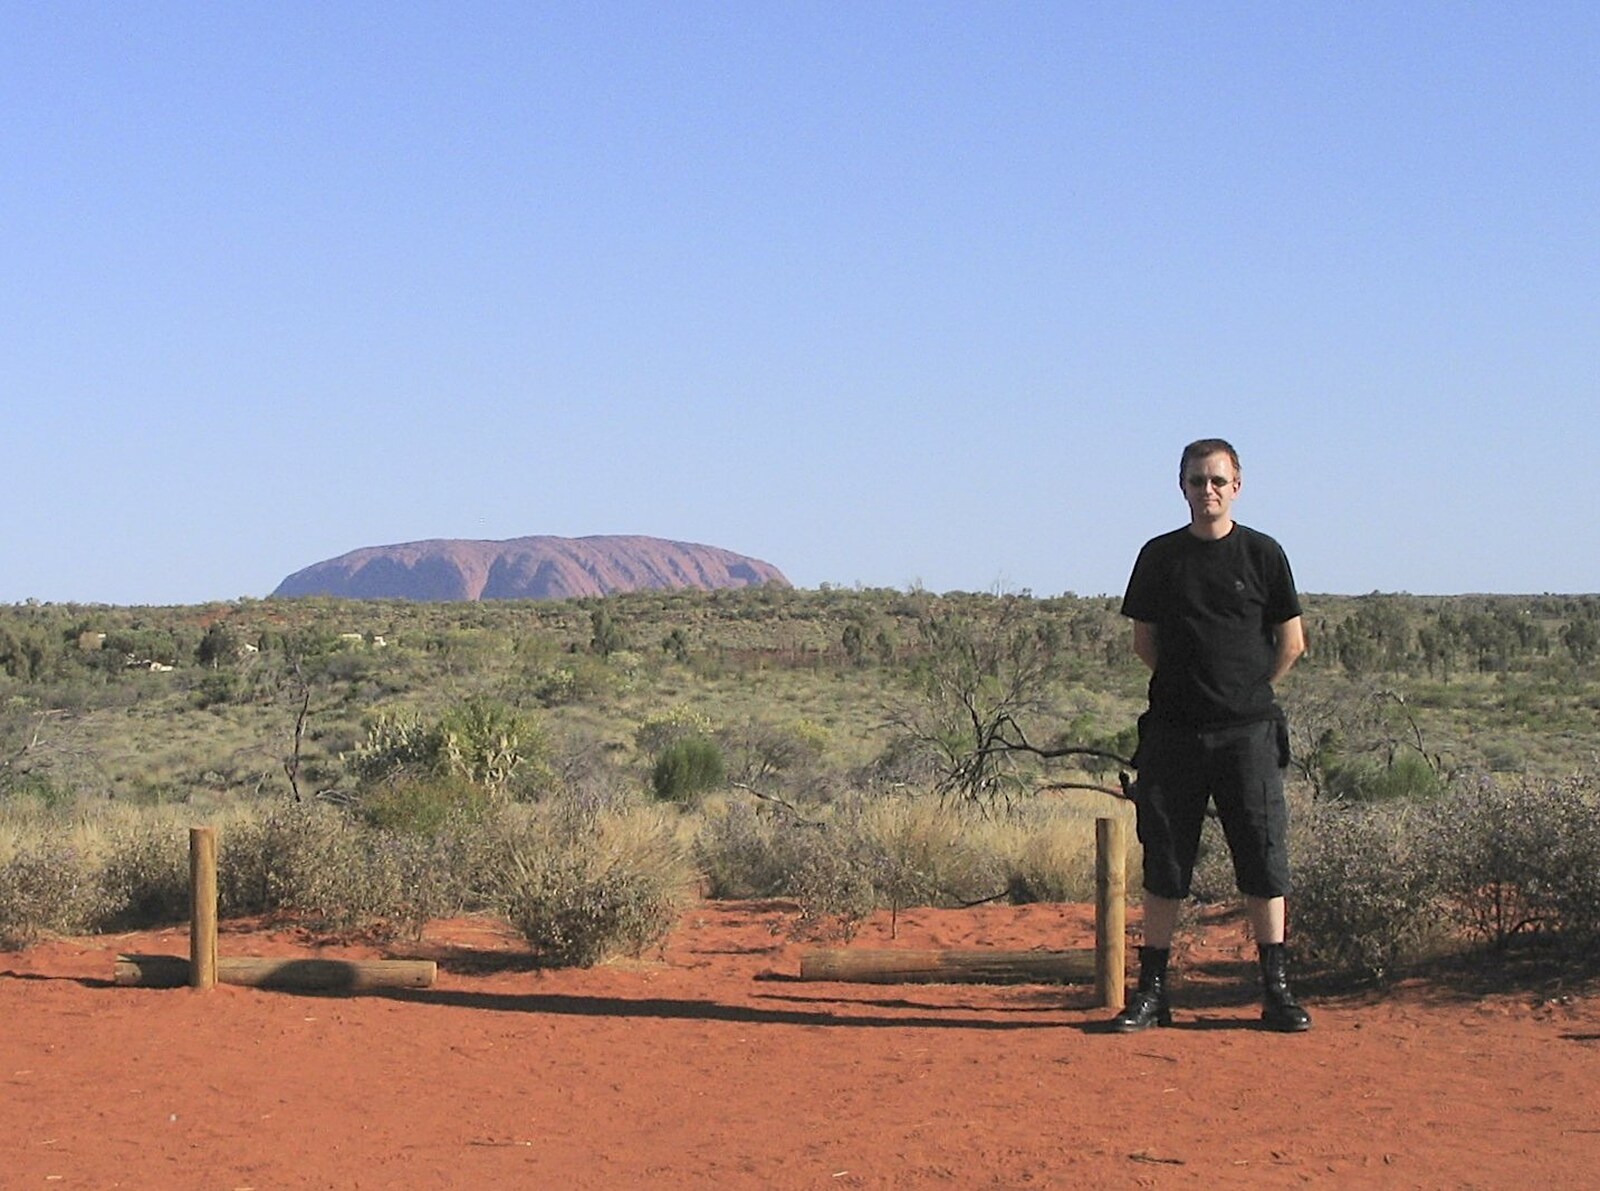 A selfie with Uluru from The Red Centre: Yulara and Uluru, Northern Territories, Australia - 8th October 2004